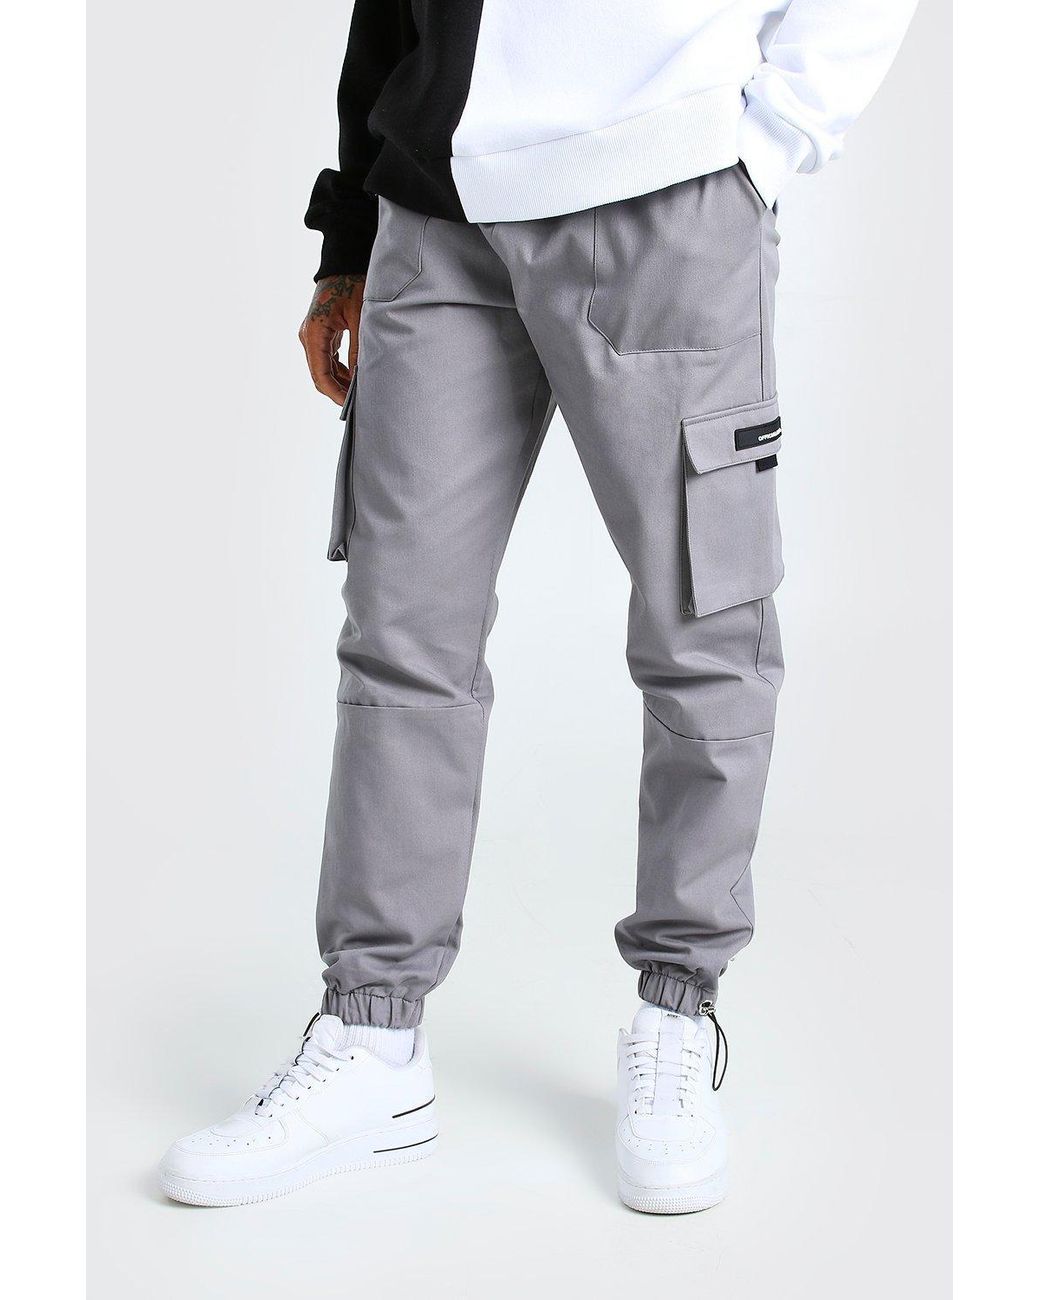 BoohooMAN Twill Cargo Trousers With Rubber Tab Detail in Grey (Gray) for  Men - Save 21% - Lyst